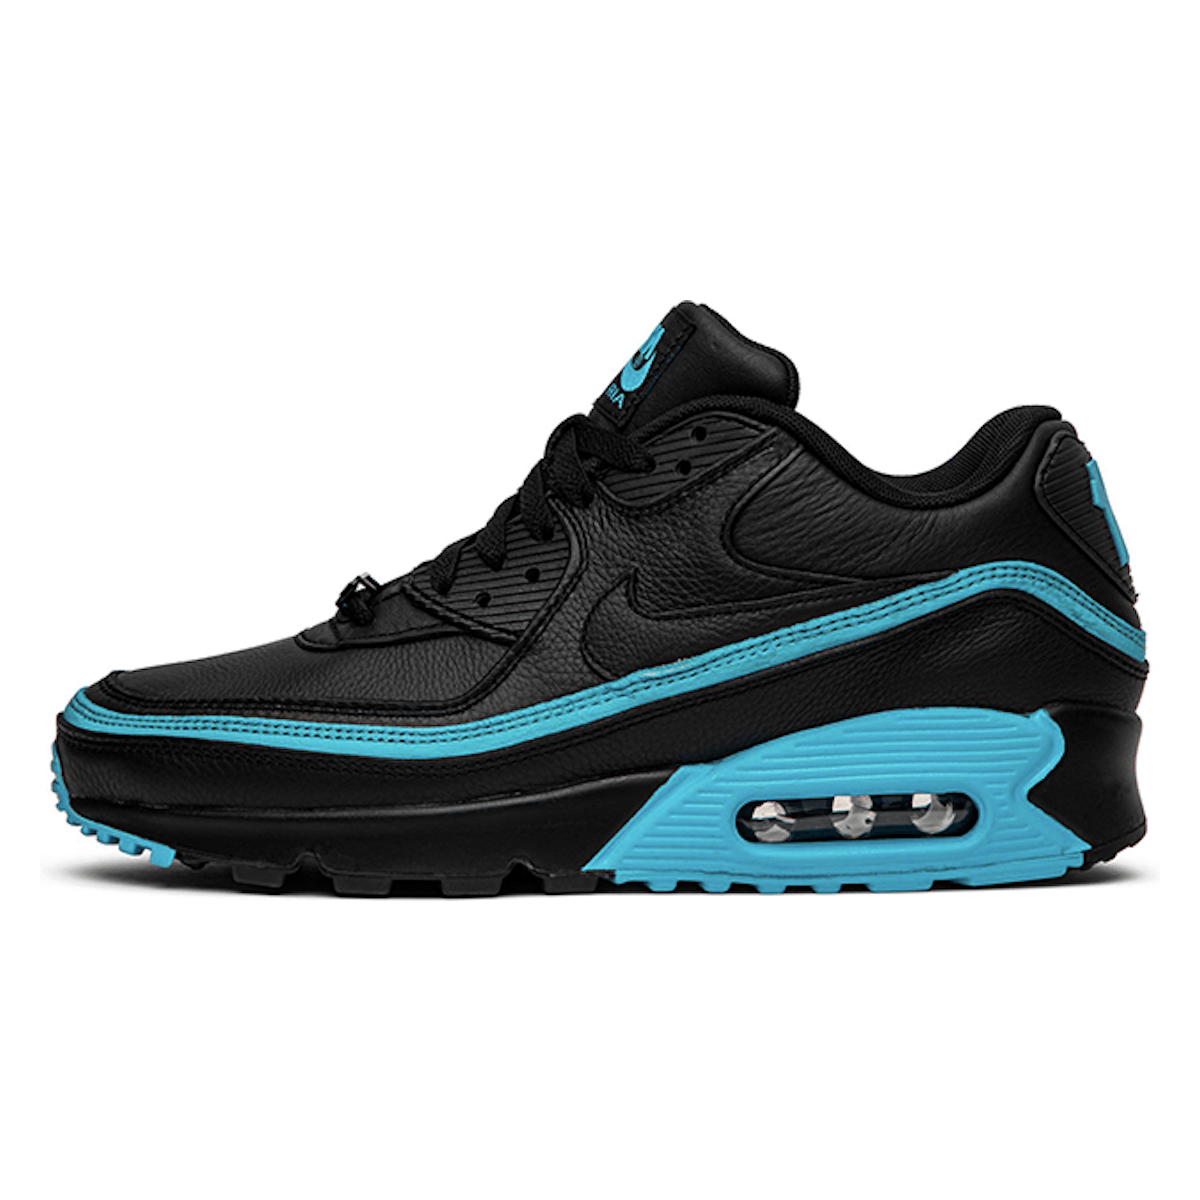 Undefeated x Nike Air Max 90 "Black Blue Fury"